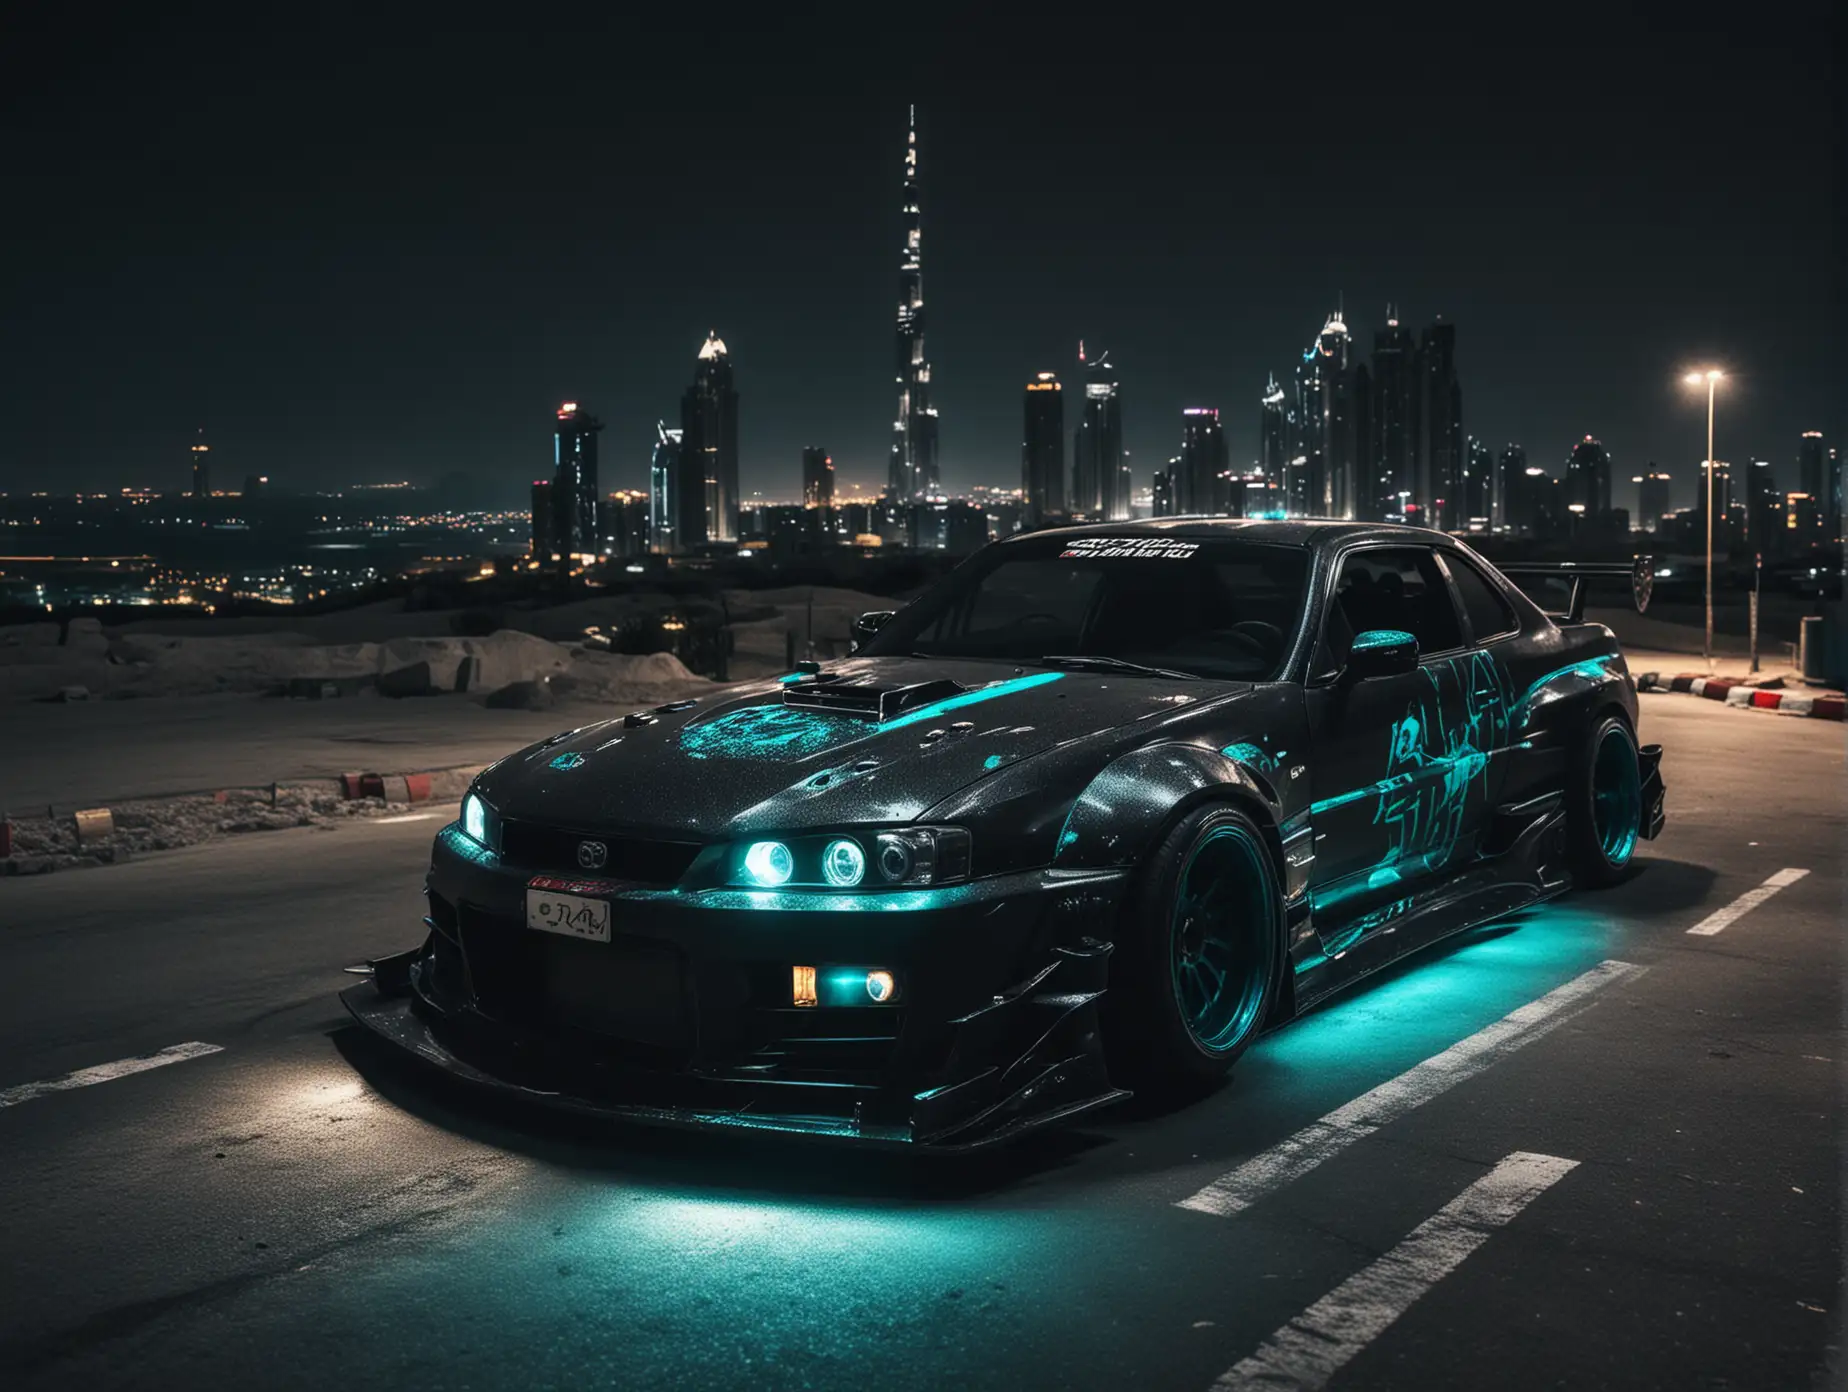 Create Japanese drifting cars from Dark Demons, Evil Tuning type, Downhill in the city of Dubai drifting at night rear view from high far away, car color dark black carbon, dark color turquoise on light